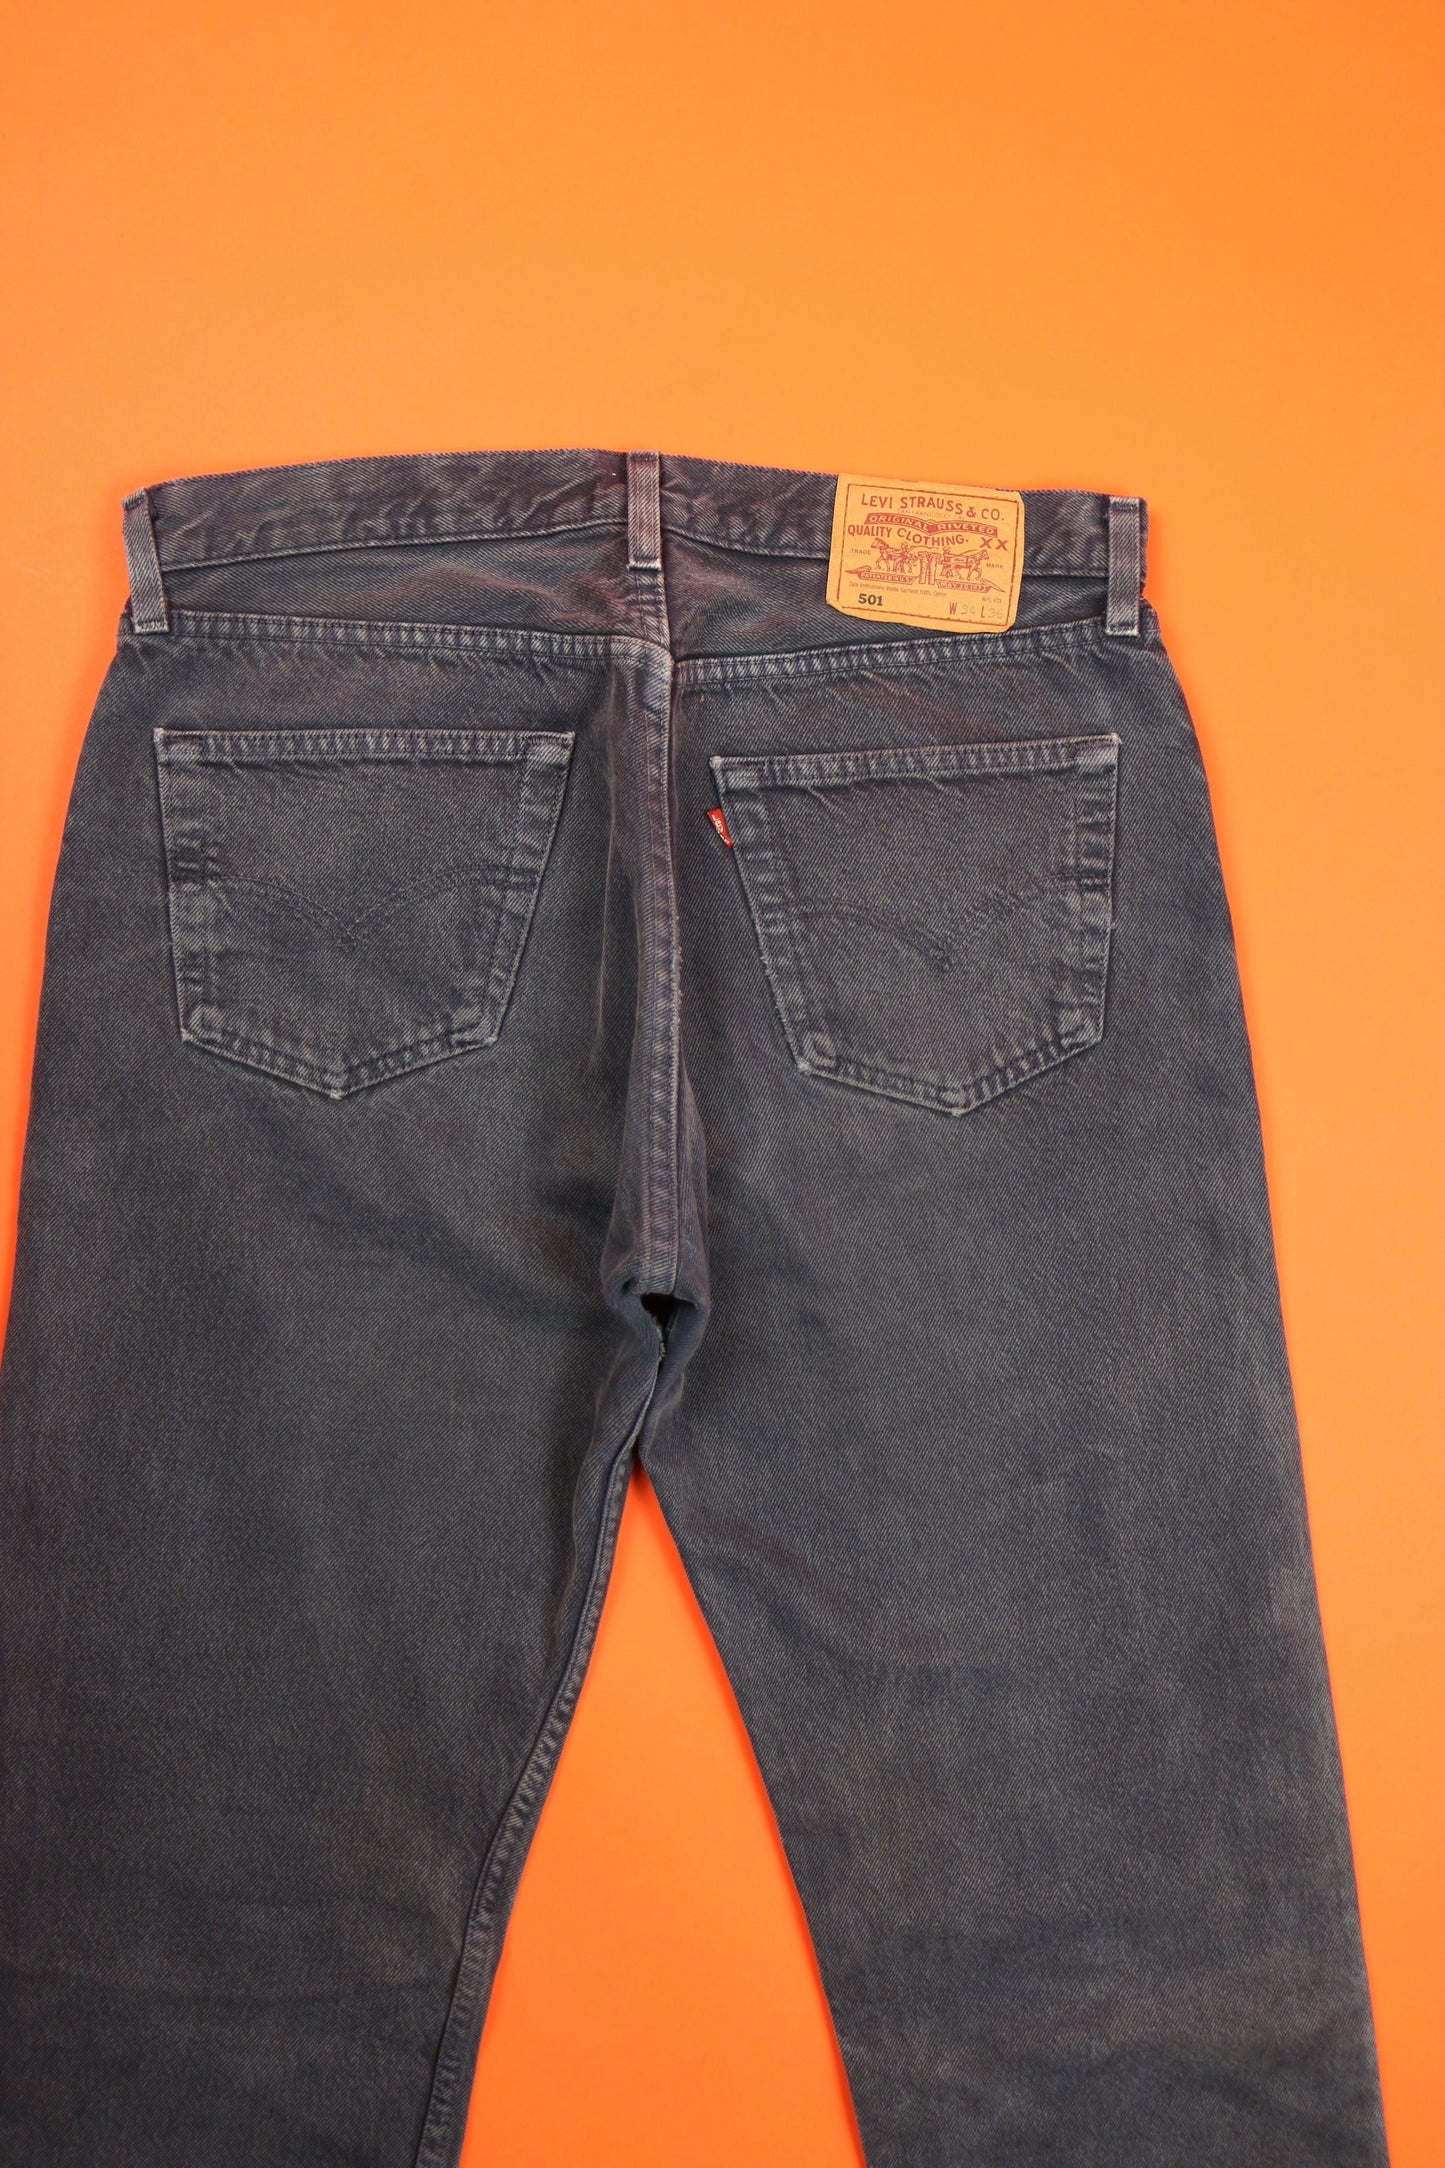 Levi's 501 Jeans Made in U.S.A. 'W34 L36' - vintage clothing clochard92.com